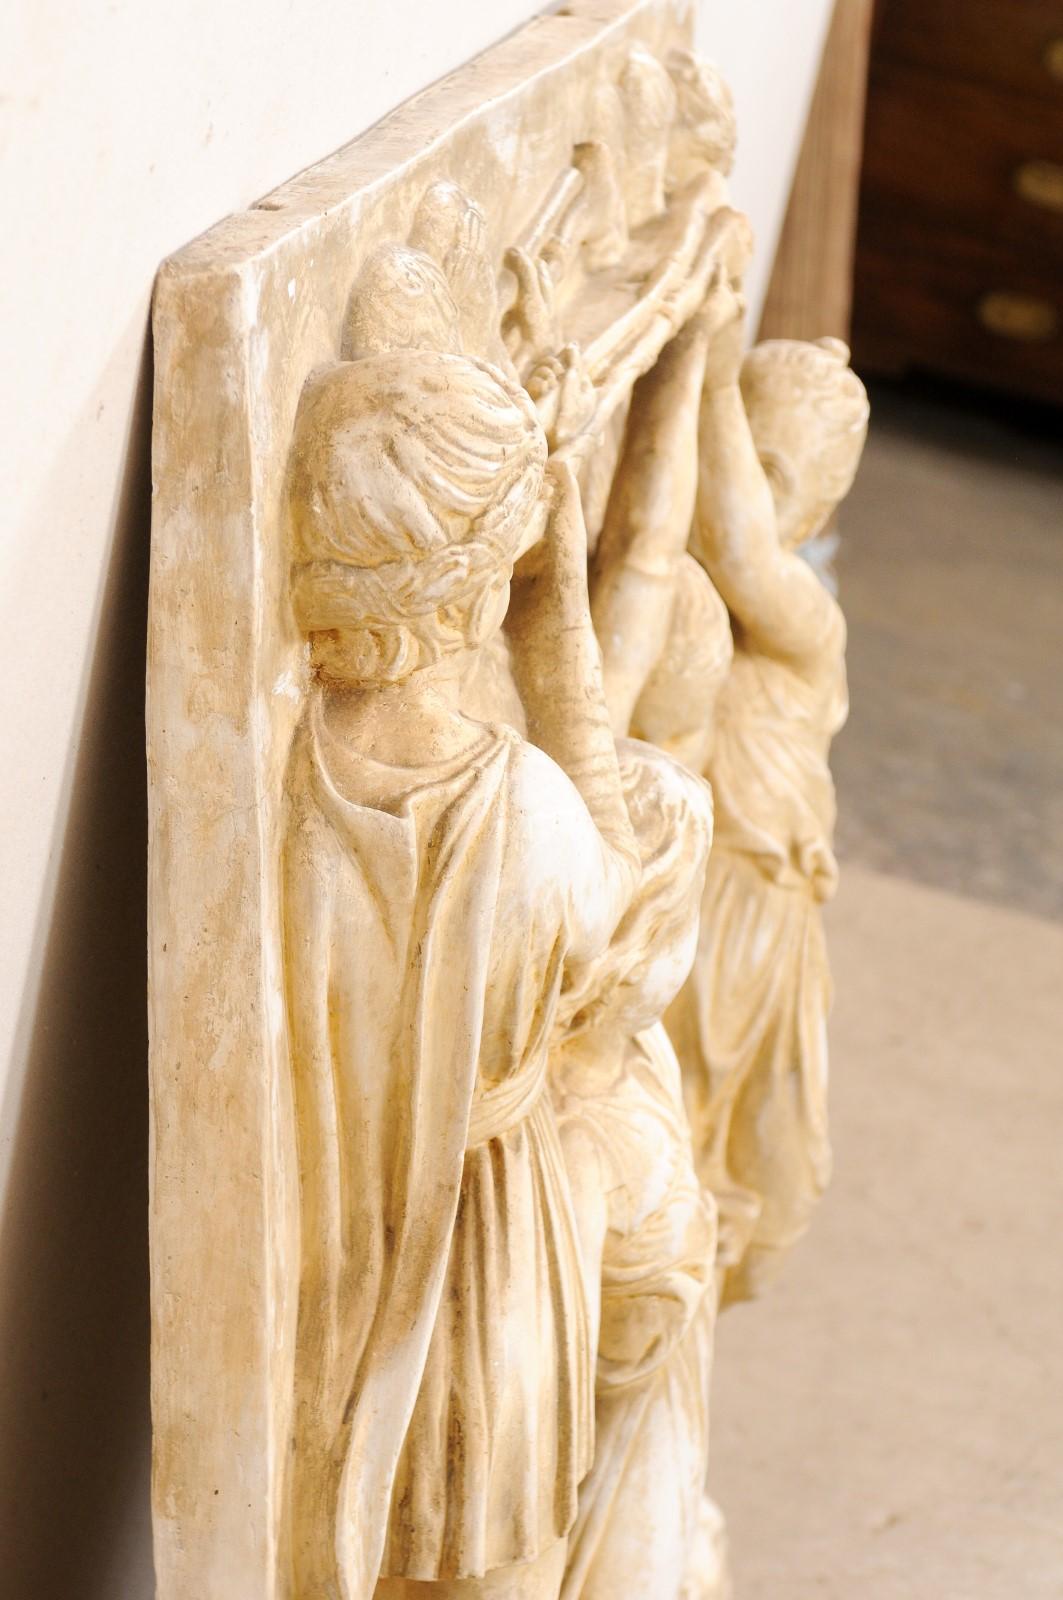 Italian Plaster Relief in Roman Figure Motif from the Mid-20th Century For Sale 7